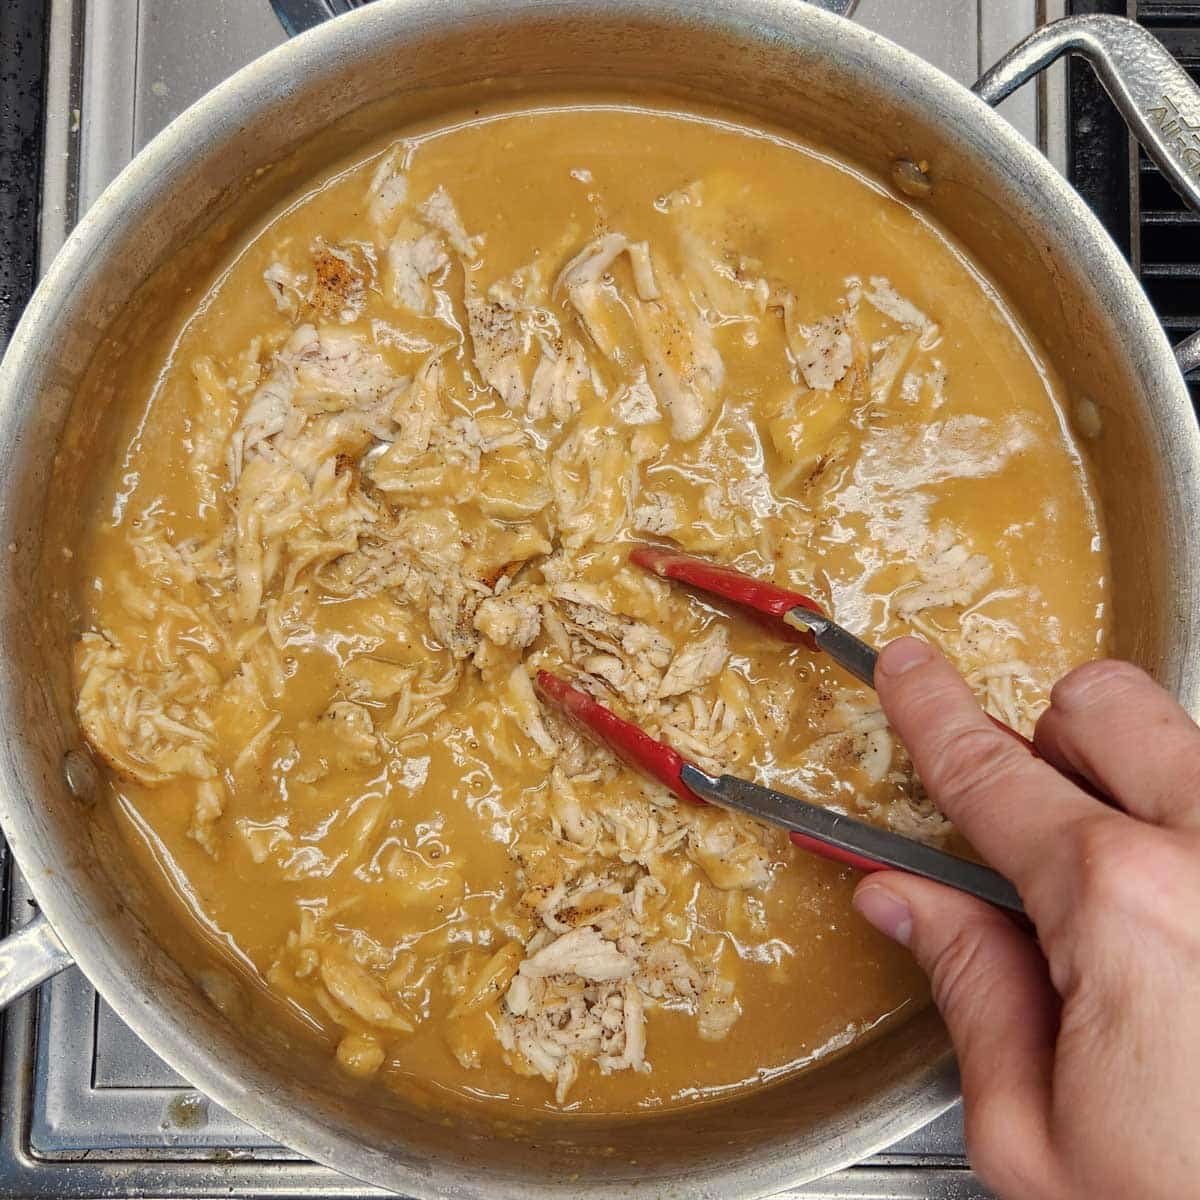 shredded chicken and gravy in a skillet on the stove top